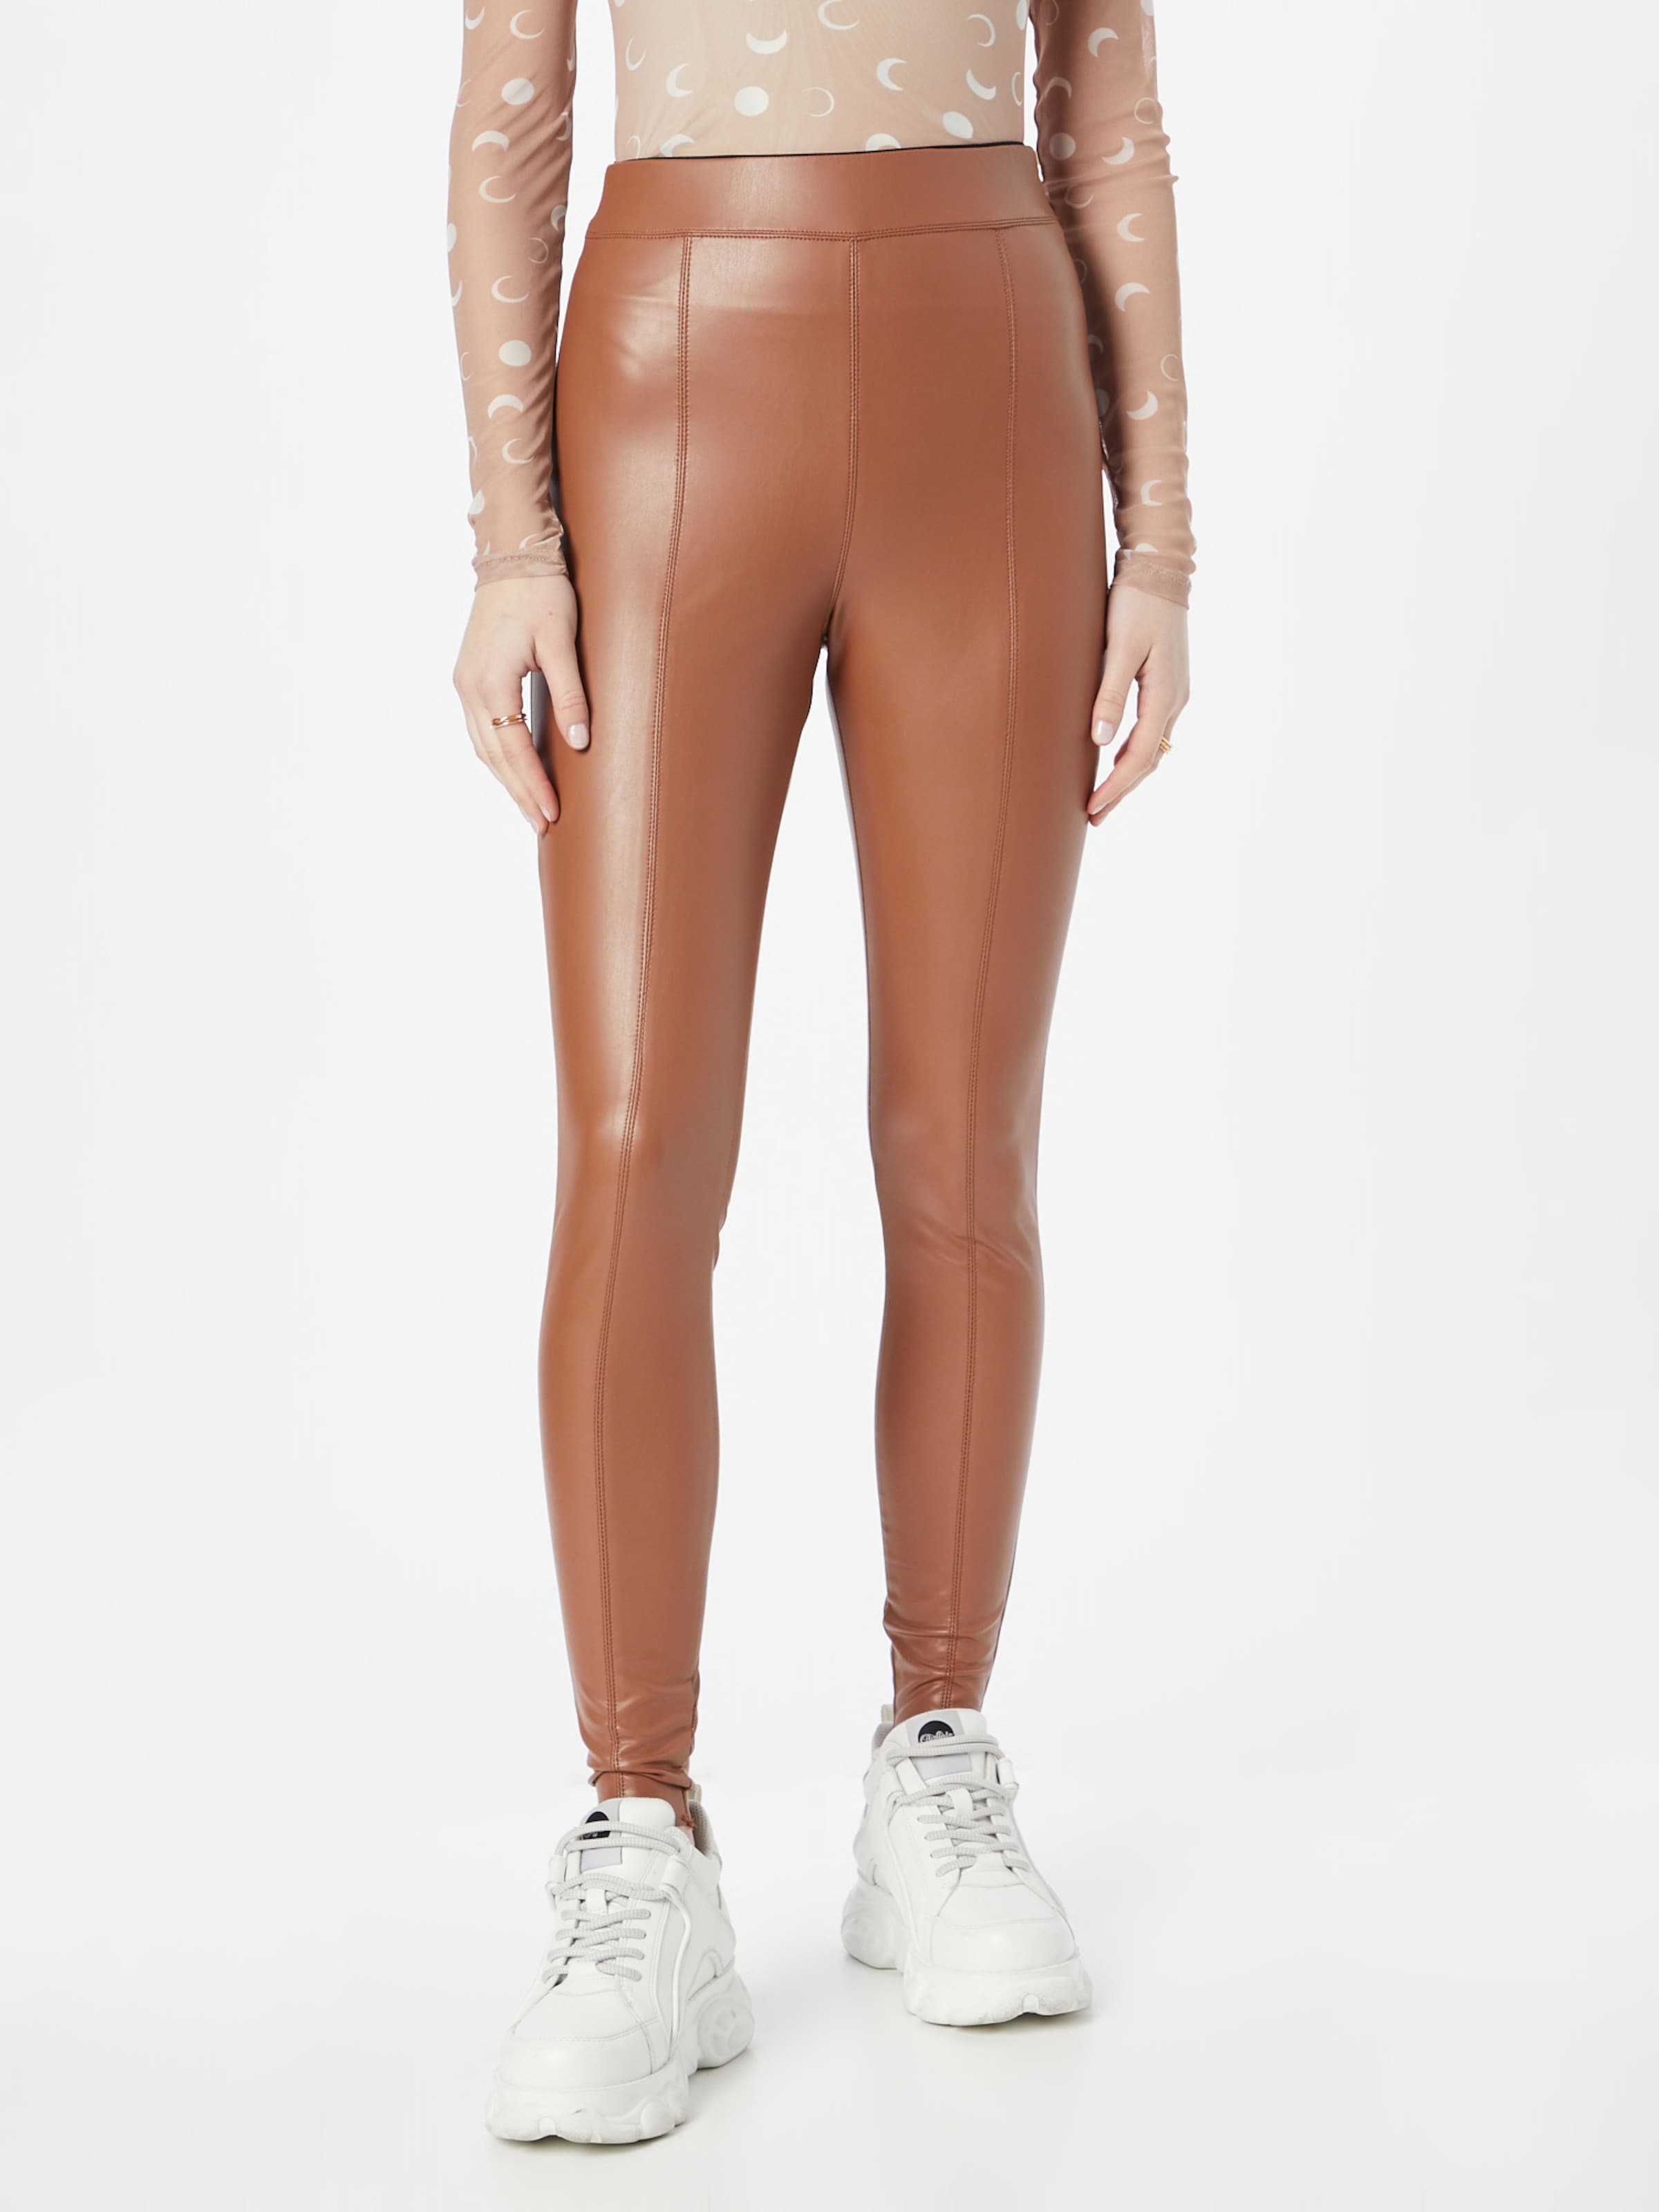 river island Real Leather Straight Trousers sold out Rrp220 uk10 melina  agolde  eBay